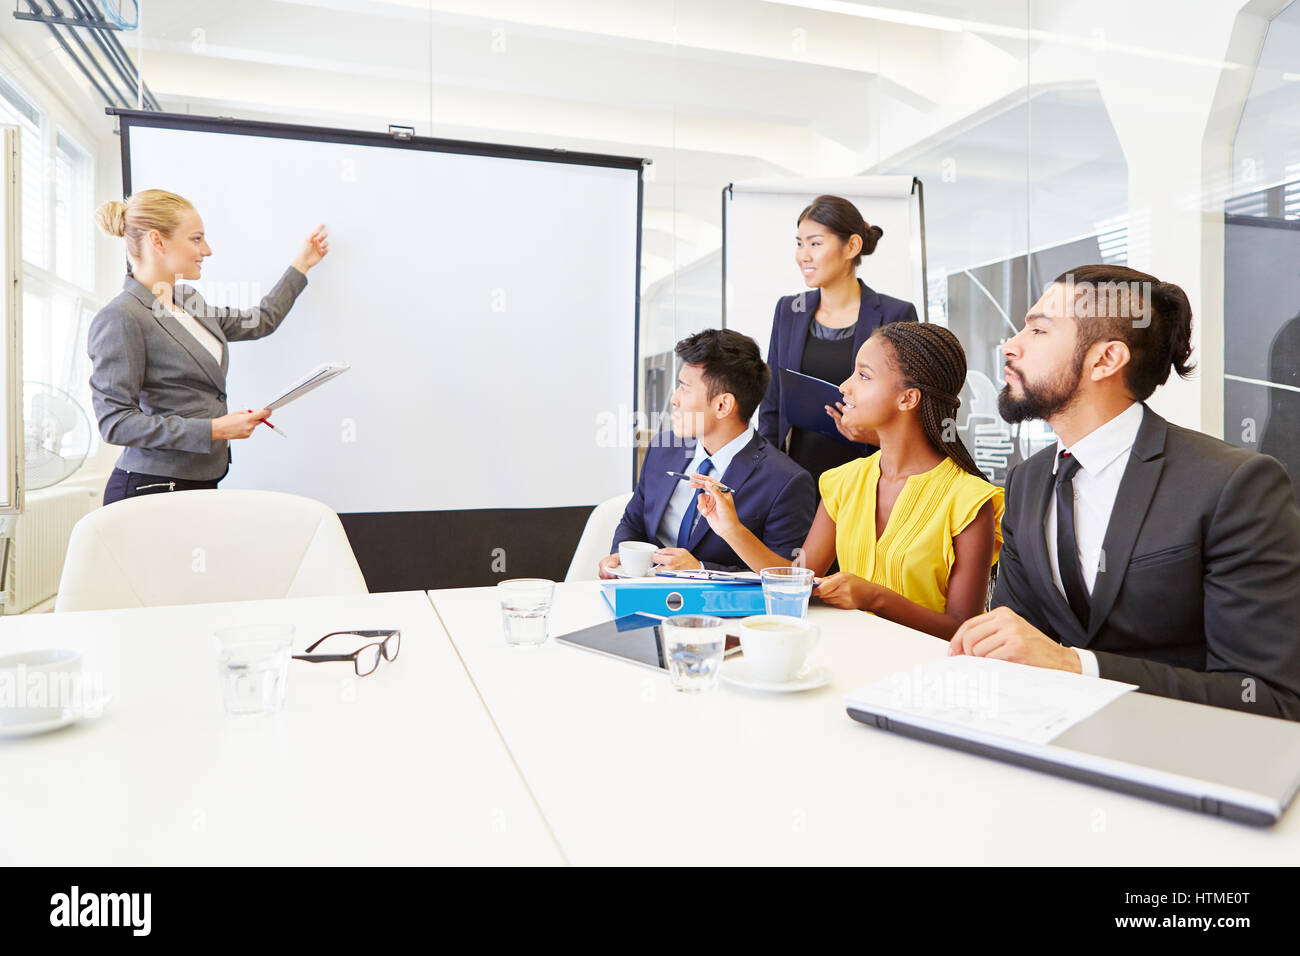 Businesswoman gives presentation with flipchart in business seminar Stock Photo